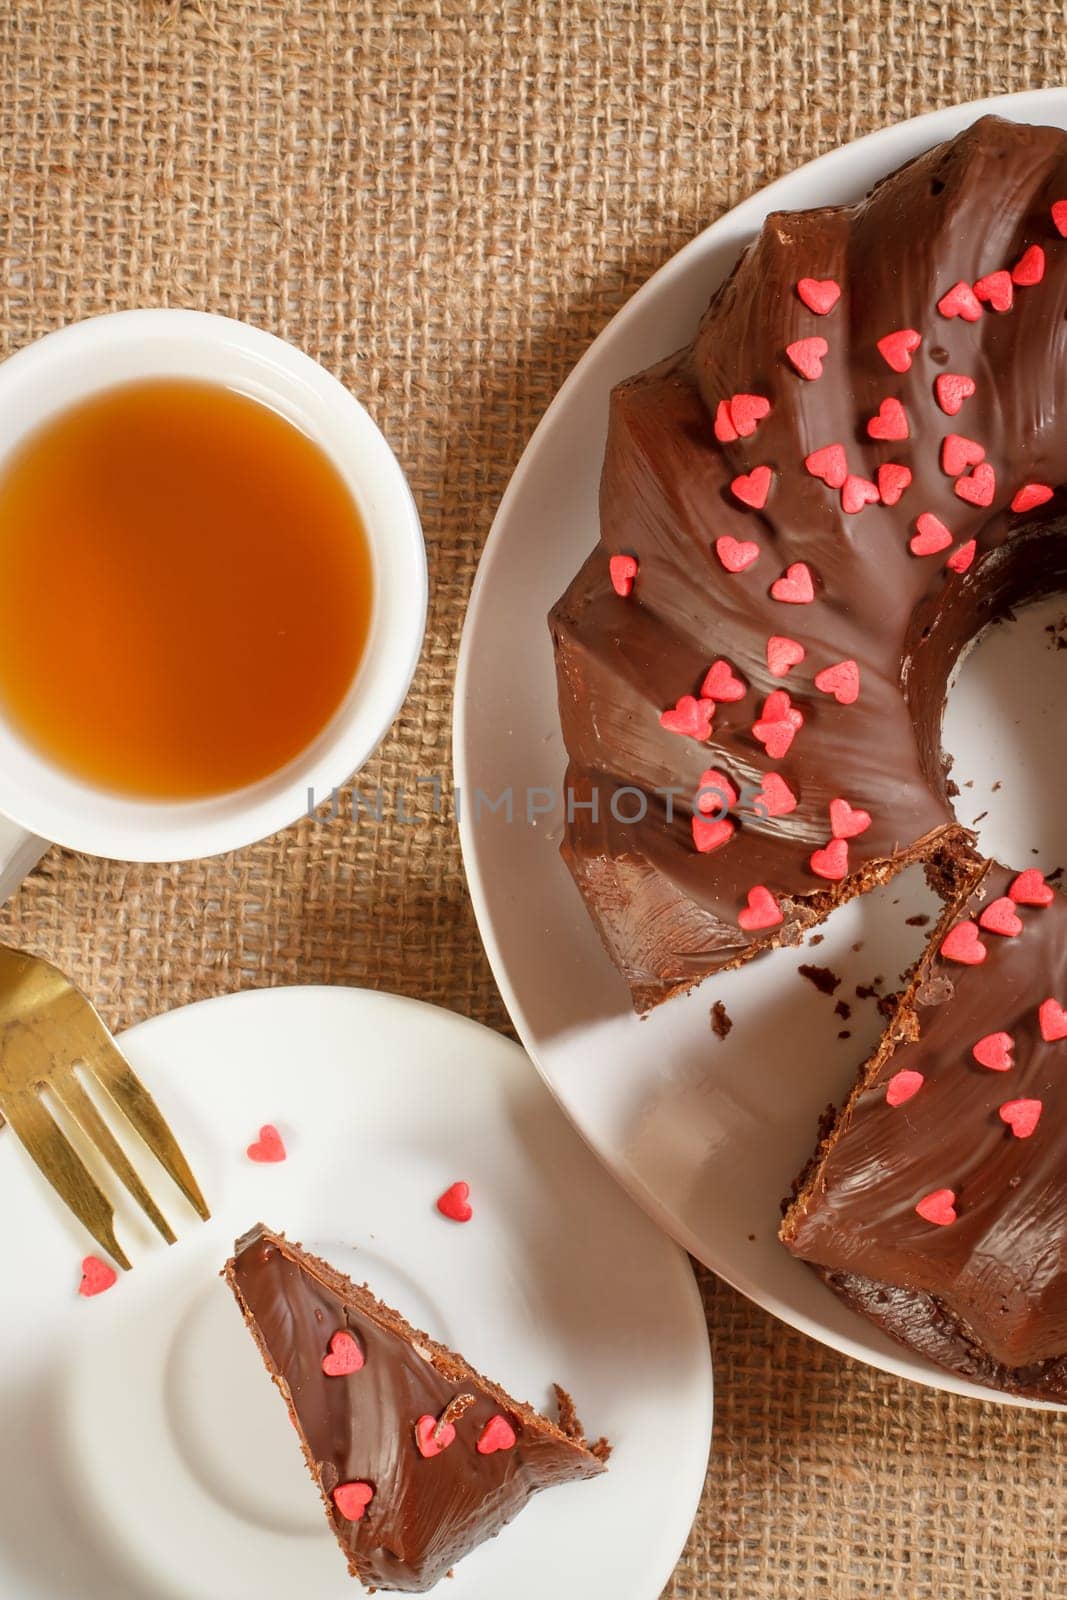 Homemade chocolate cake decorated with small hearts made of caramel on plate, cup of tea, slice of cake on saucer and fork on the table with sackcloth. Top view.